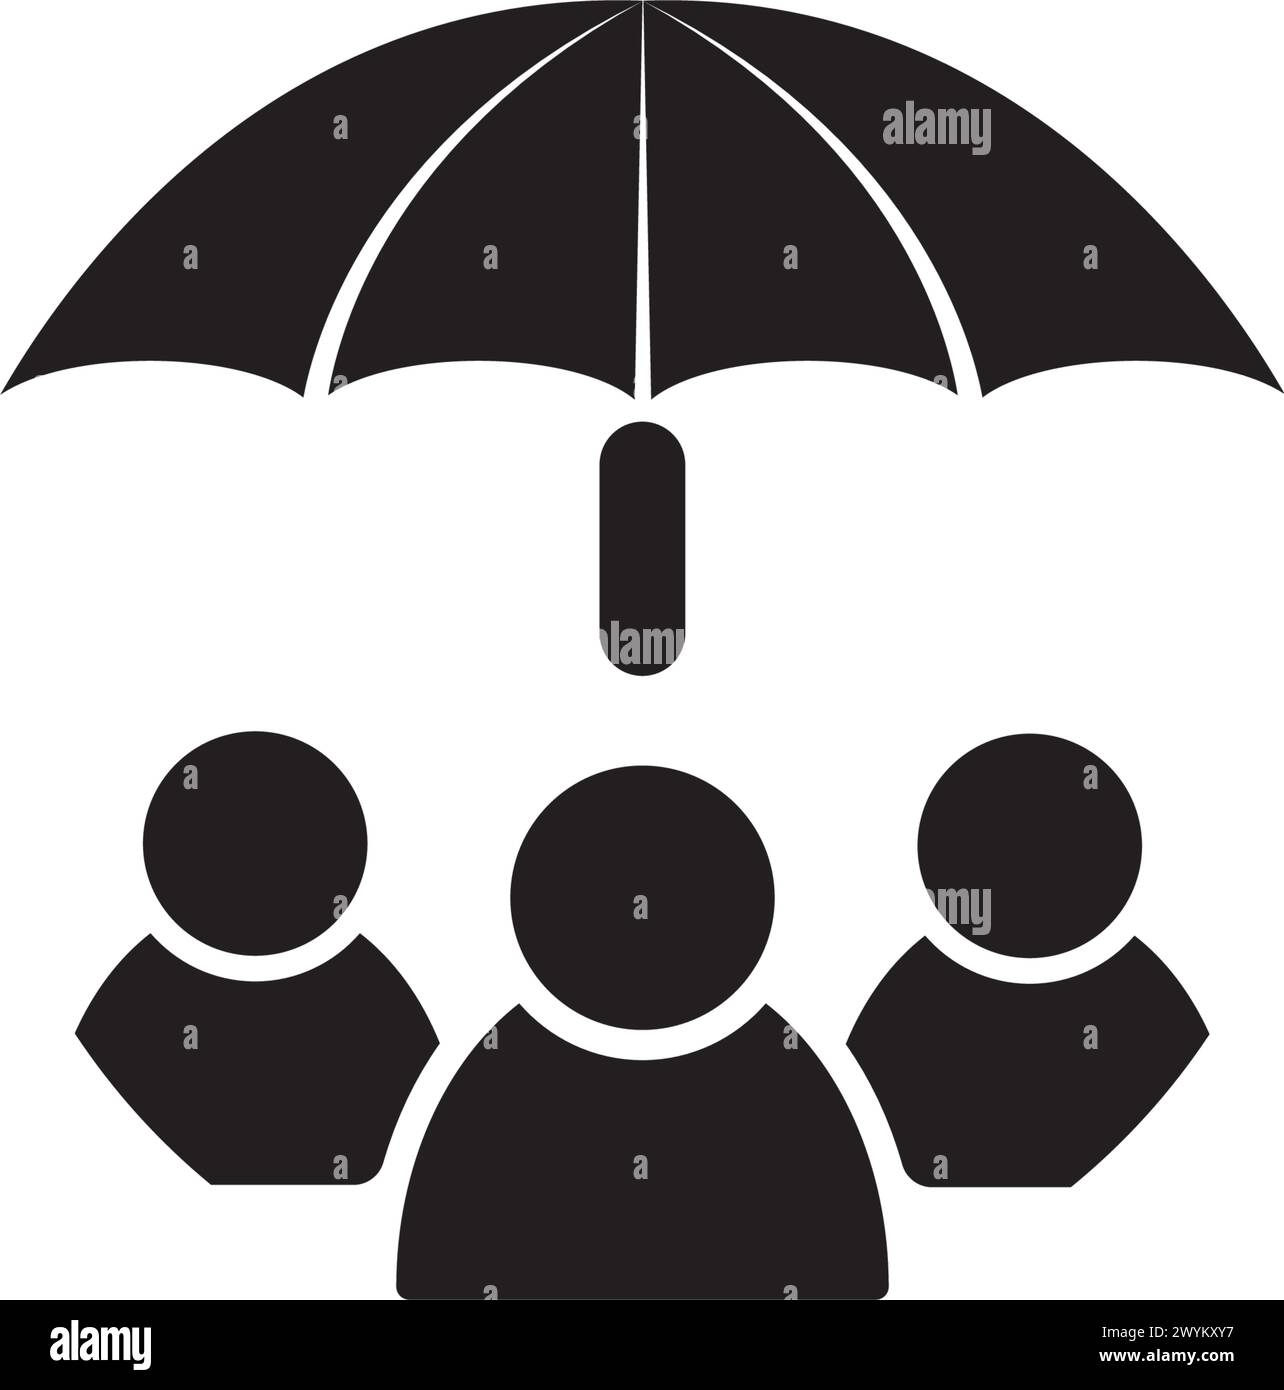 Group of people protected icon logo, vector design illustration Stock Vector